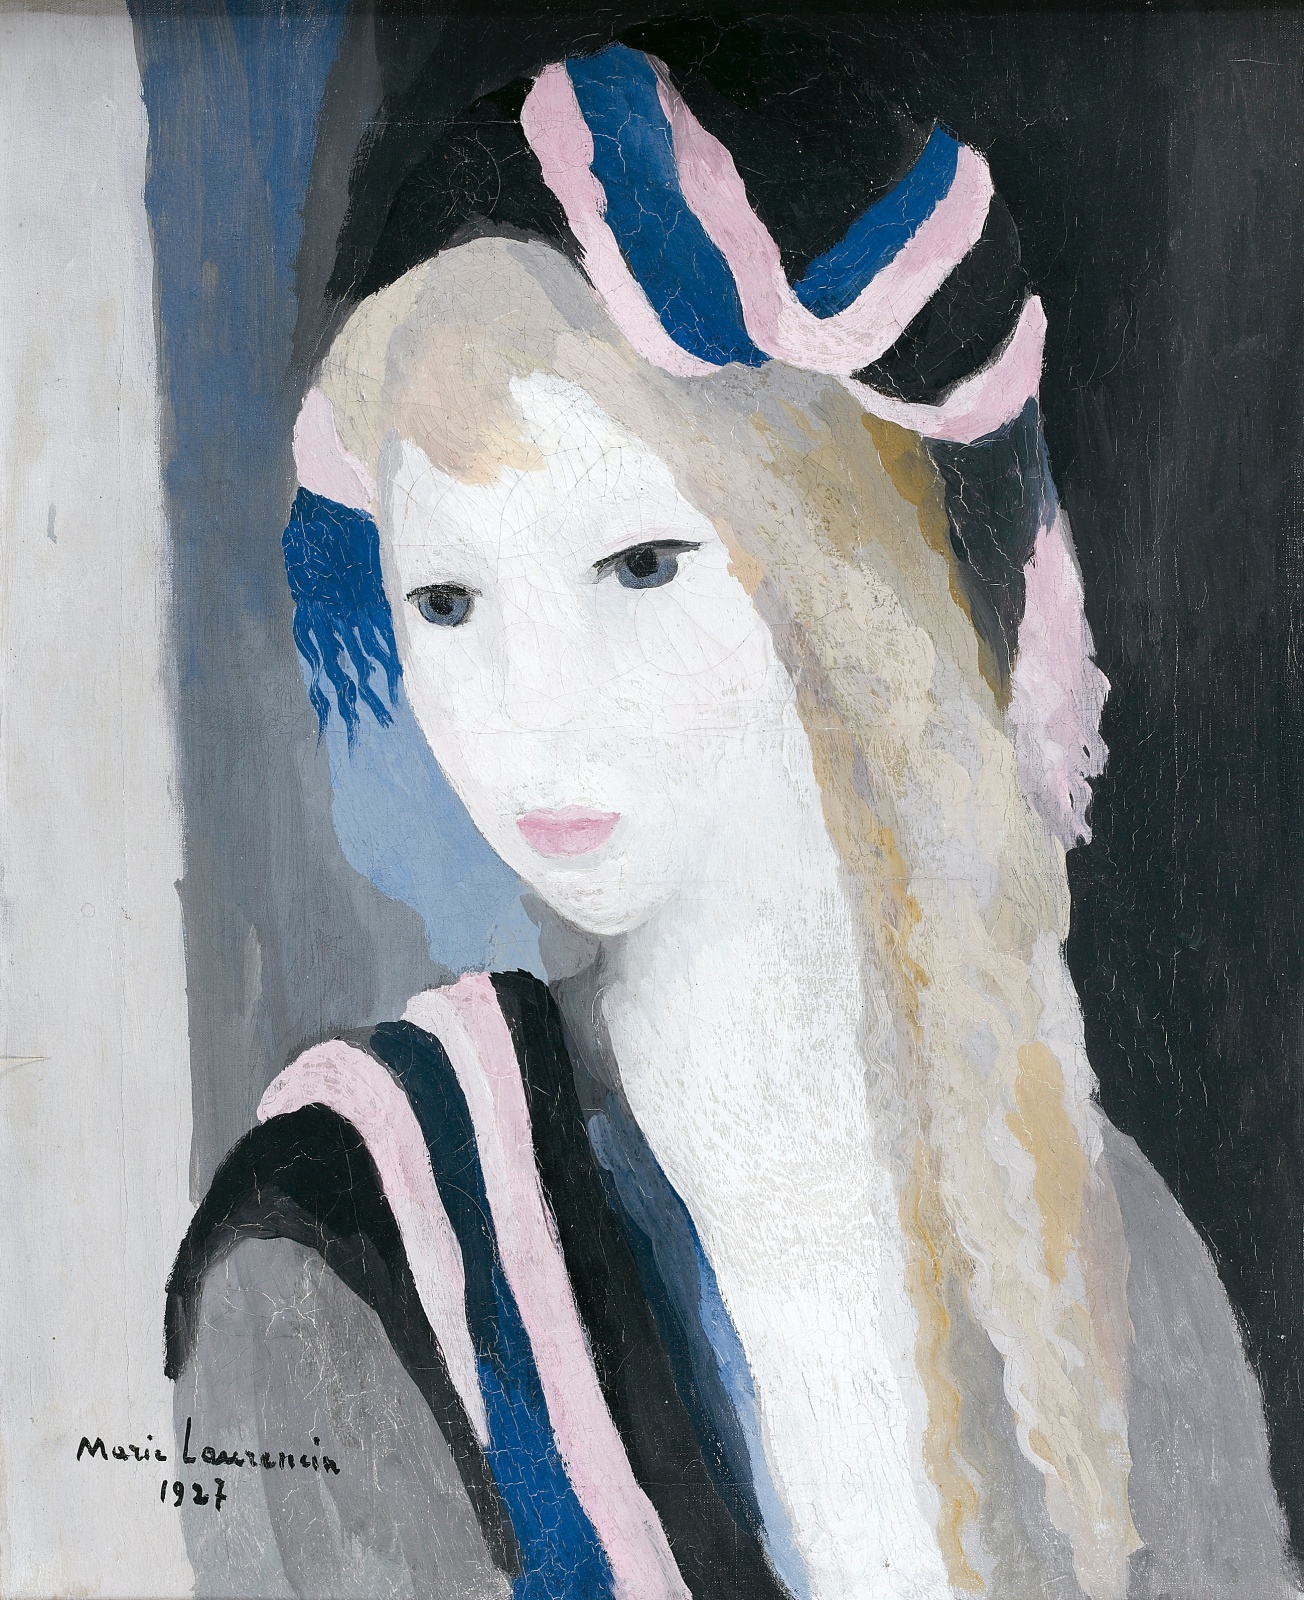 Marie Laurencin, Buste de femme (Bust of a Woman), 1927, Oil on canvas, 18 x 15 inches © Fondation Foujita / Artists Rights Society (ARS), New York / ADAGP, Paris 2023